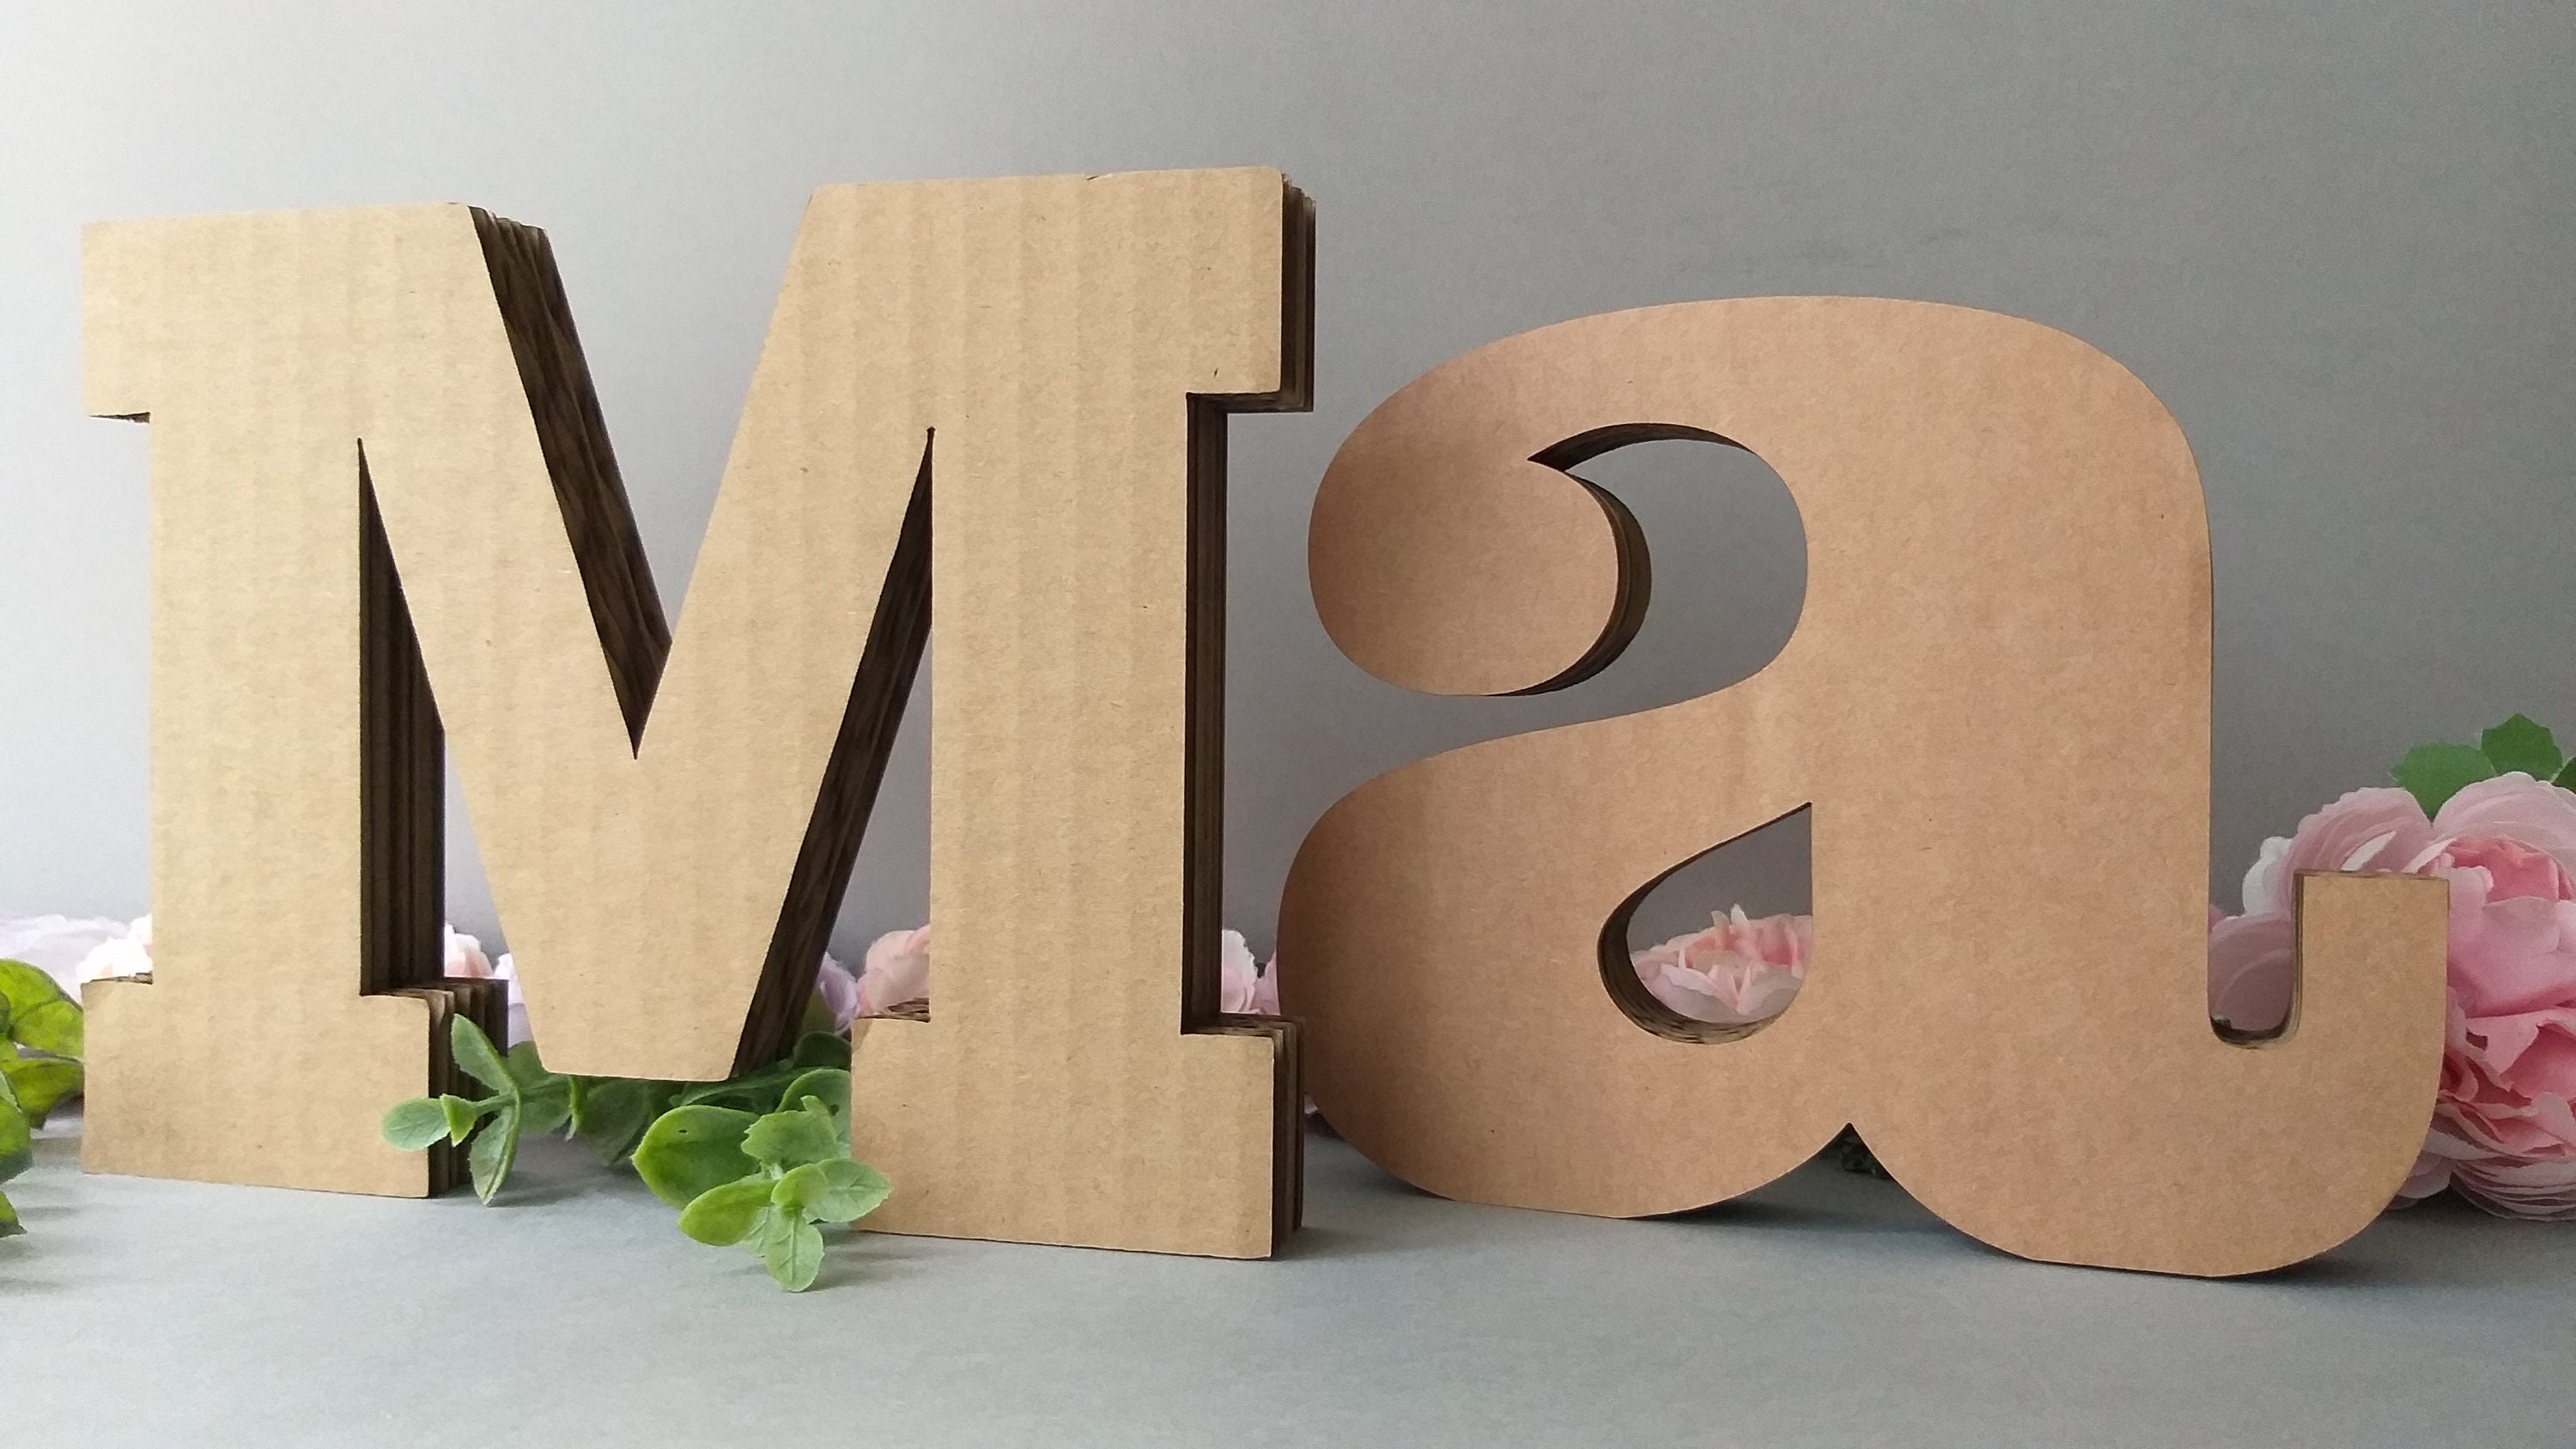 Buy Free Standing Cardboard Letters and Numbers. DIY Letters and Numbers.  3D Letters and Numbers. Different Sizes. for Multiple Purposes. Online in  India 